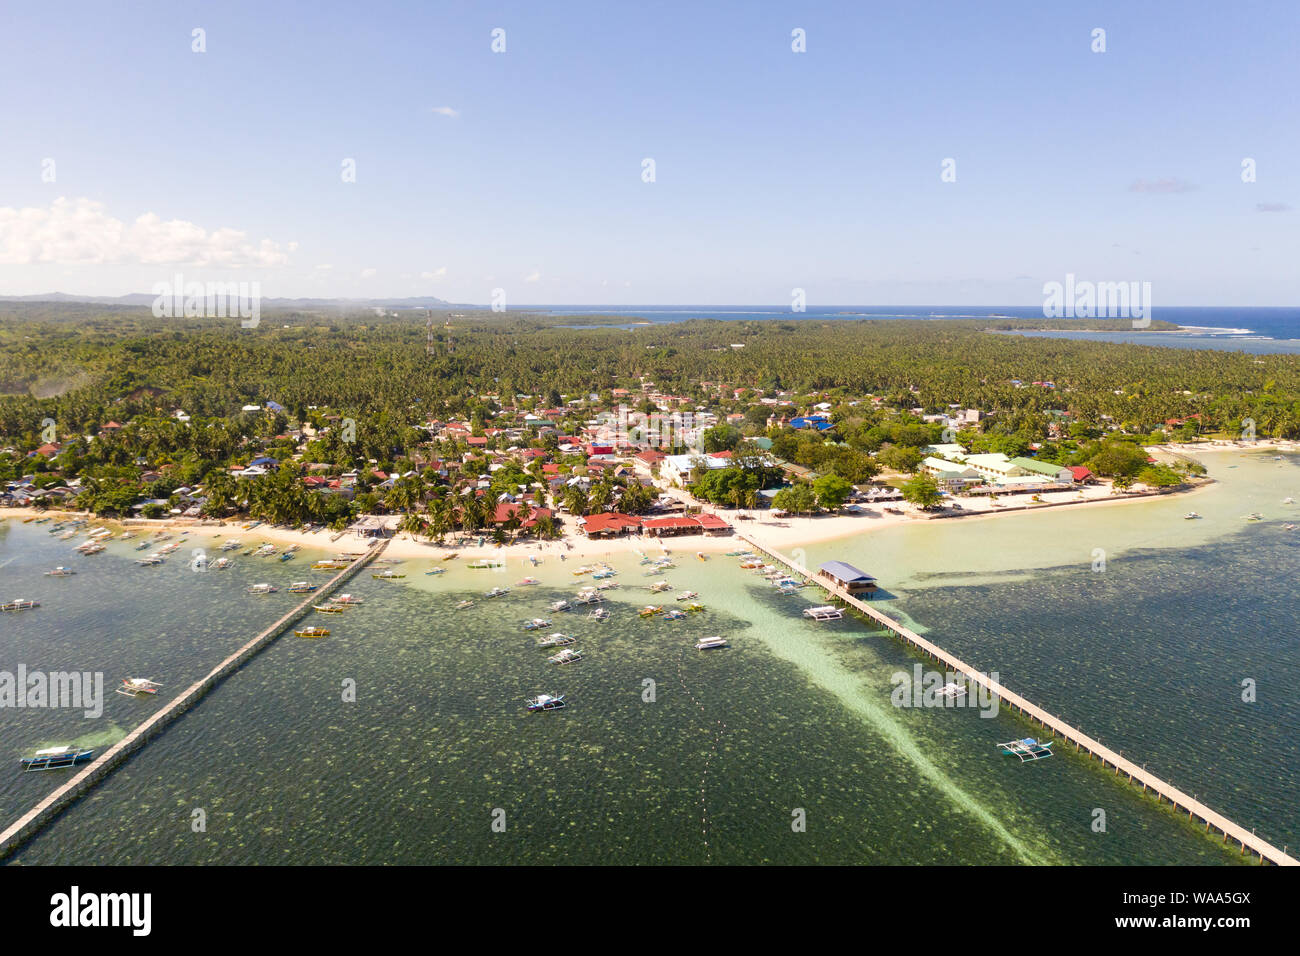 City General Luna on the coast of Siargao with a pier, a port and tourist boats. Marina with boats. Stock Photo